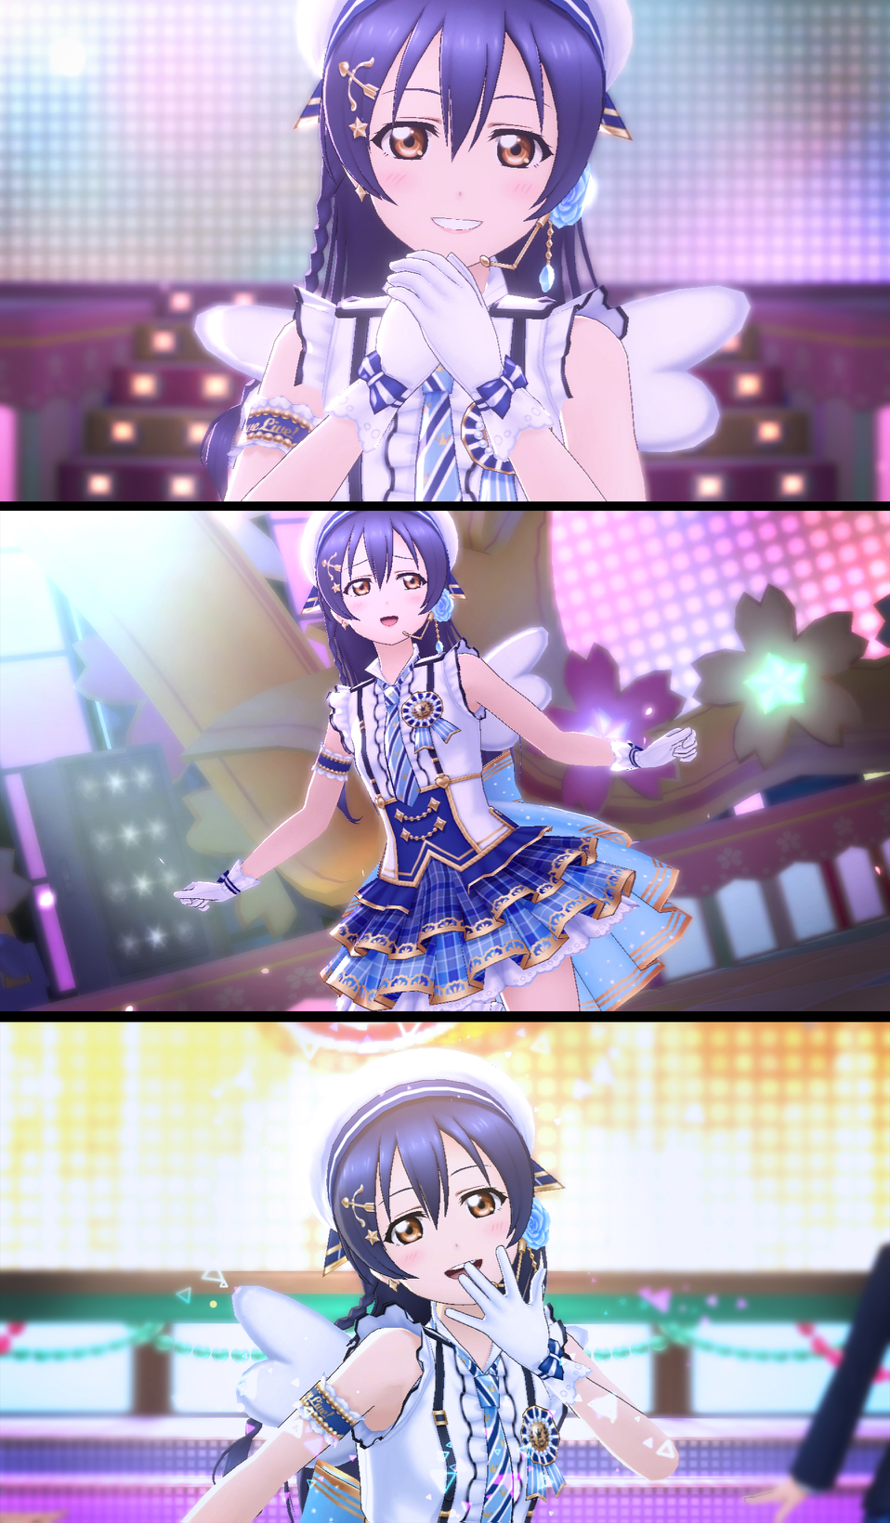 Umi, I don't have the right words to really describe how much I care about you. You've been my best...